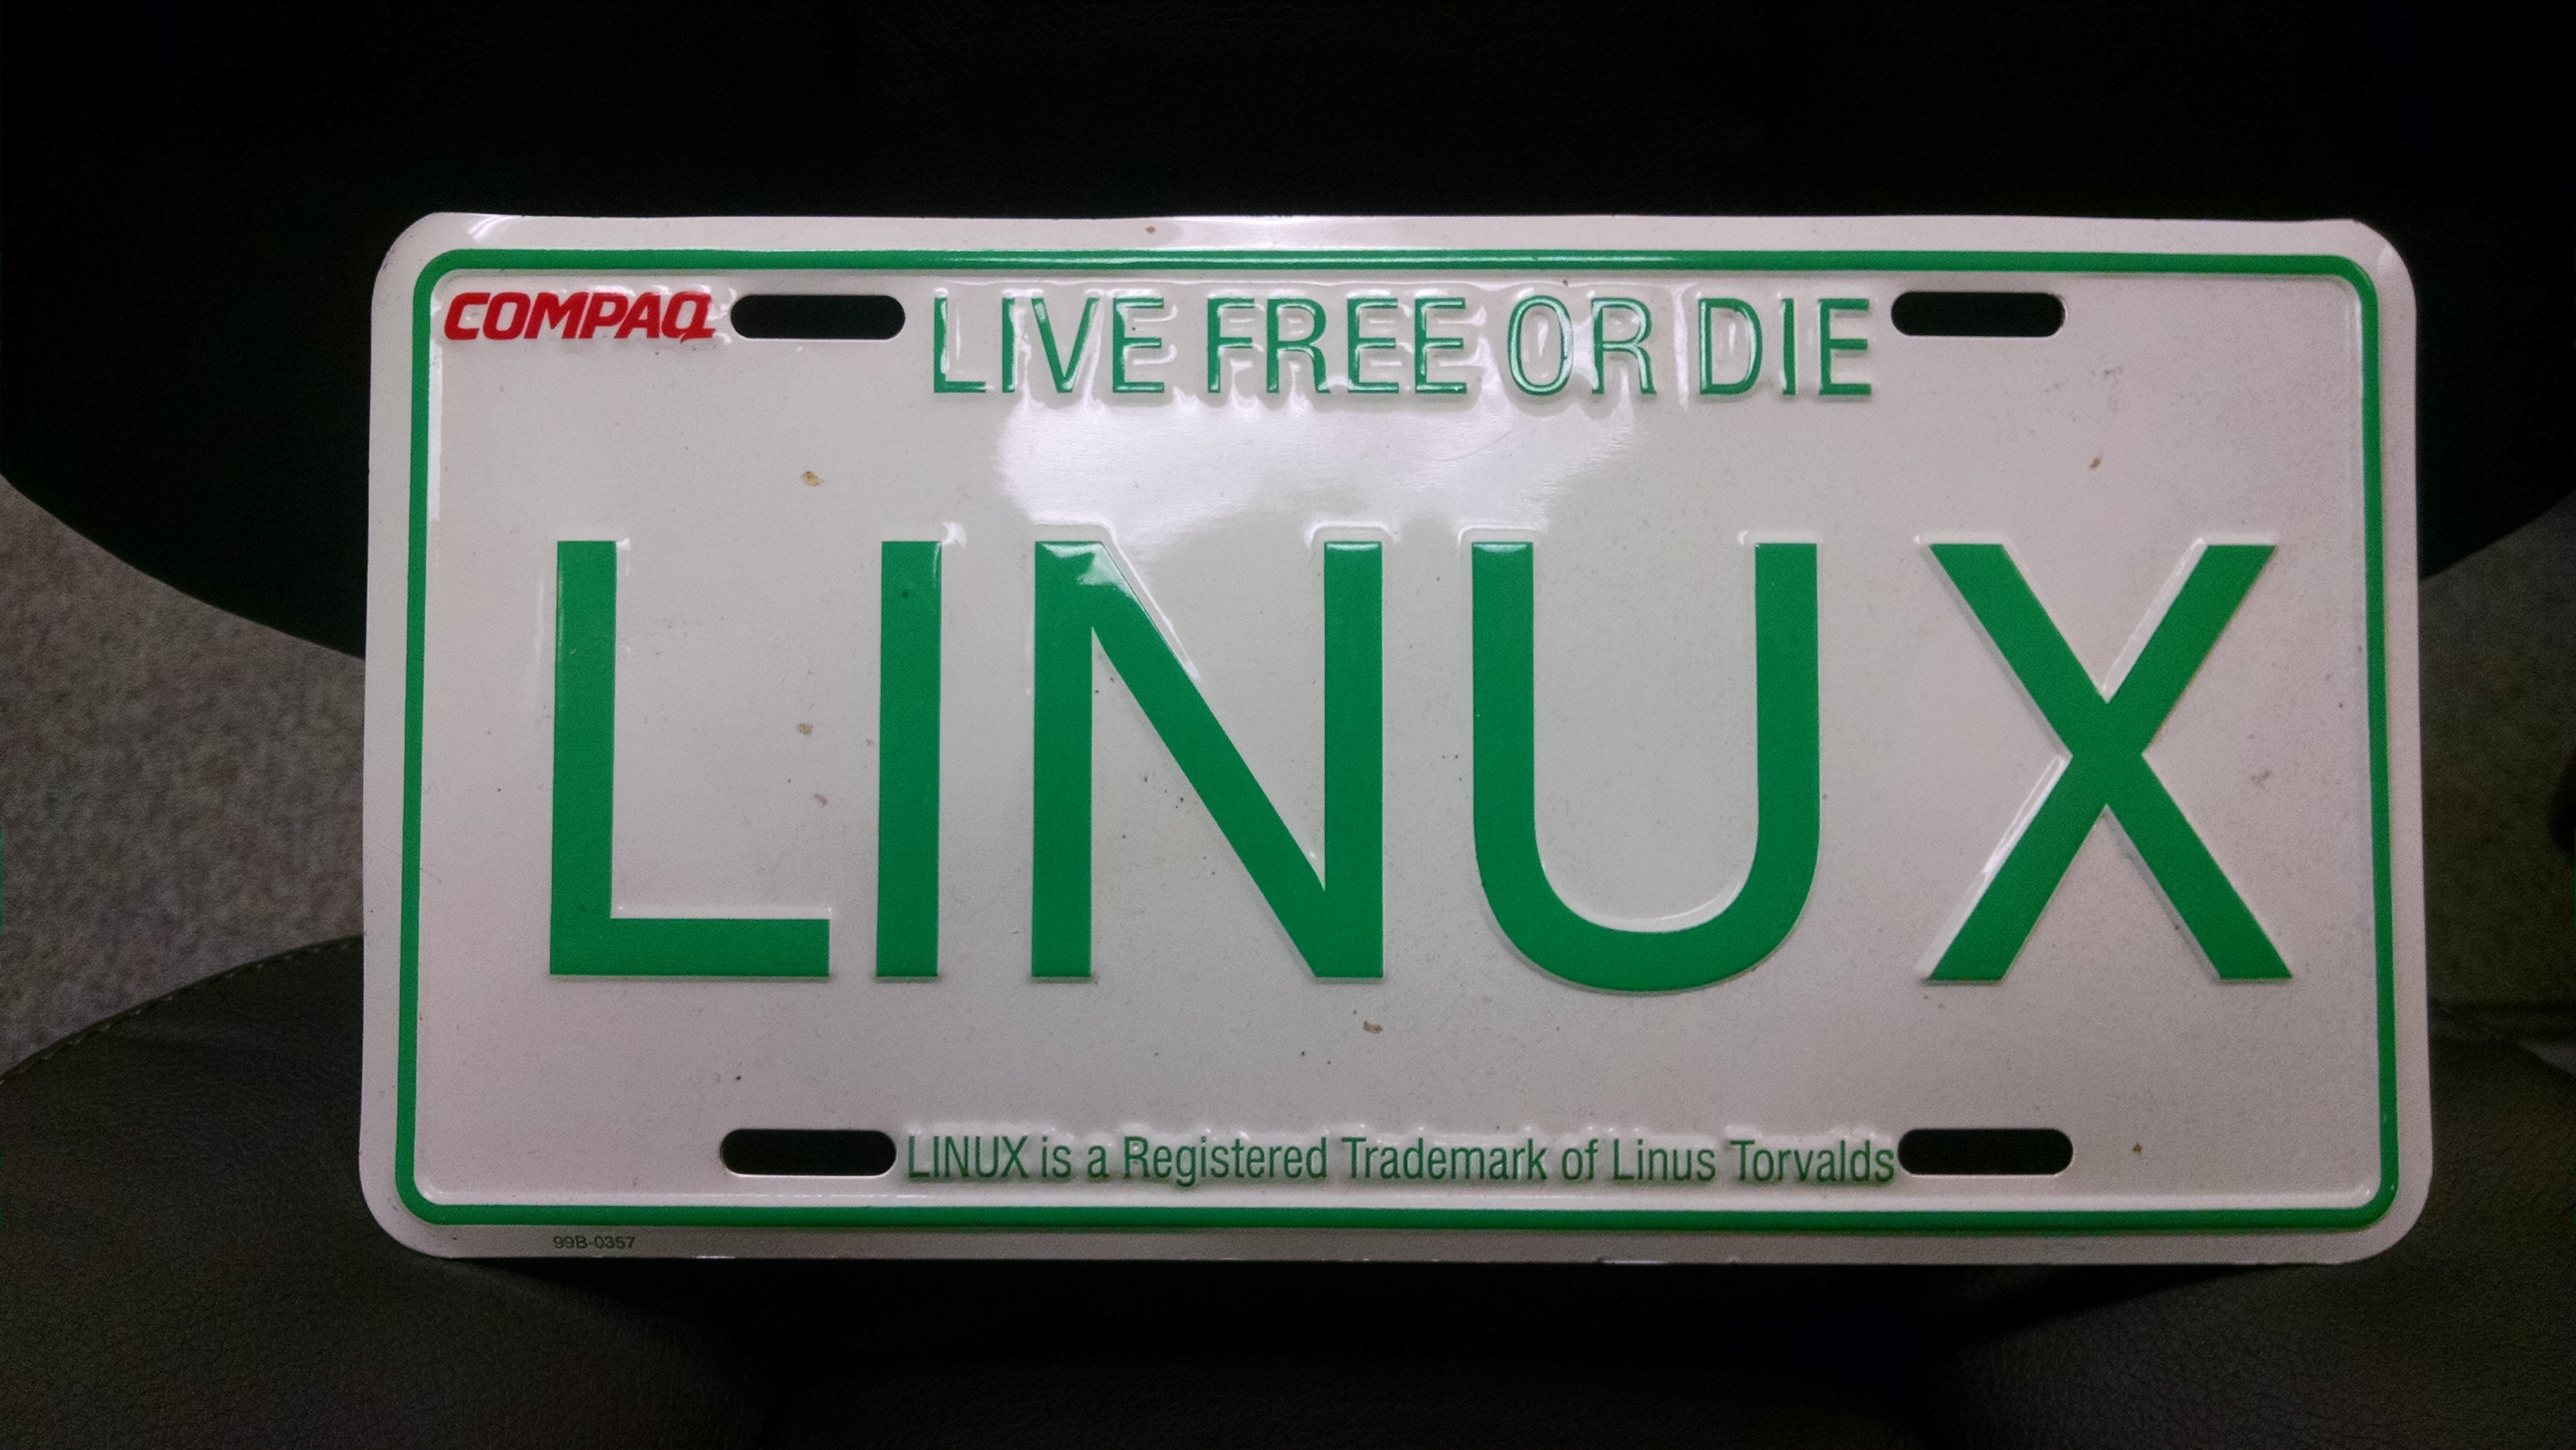 Linux turns 24